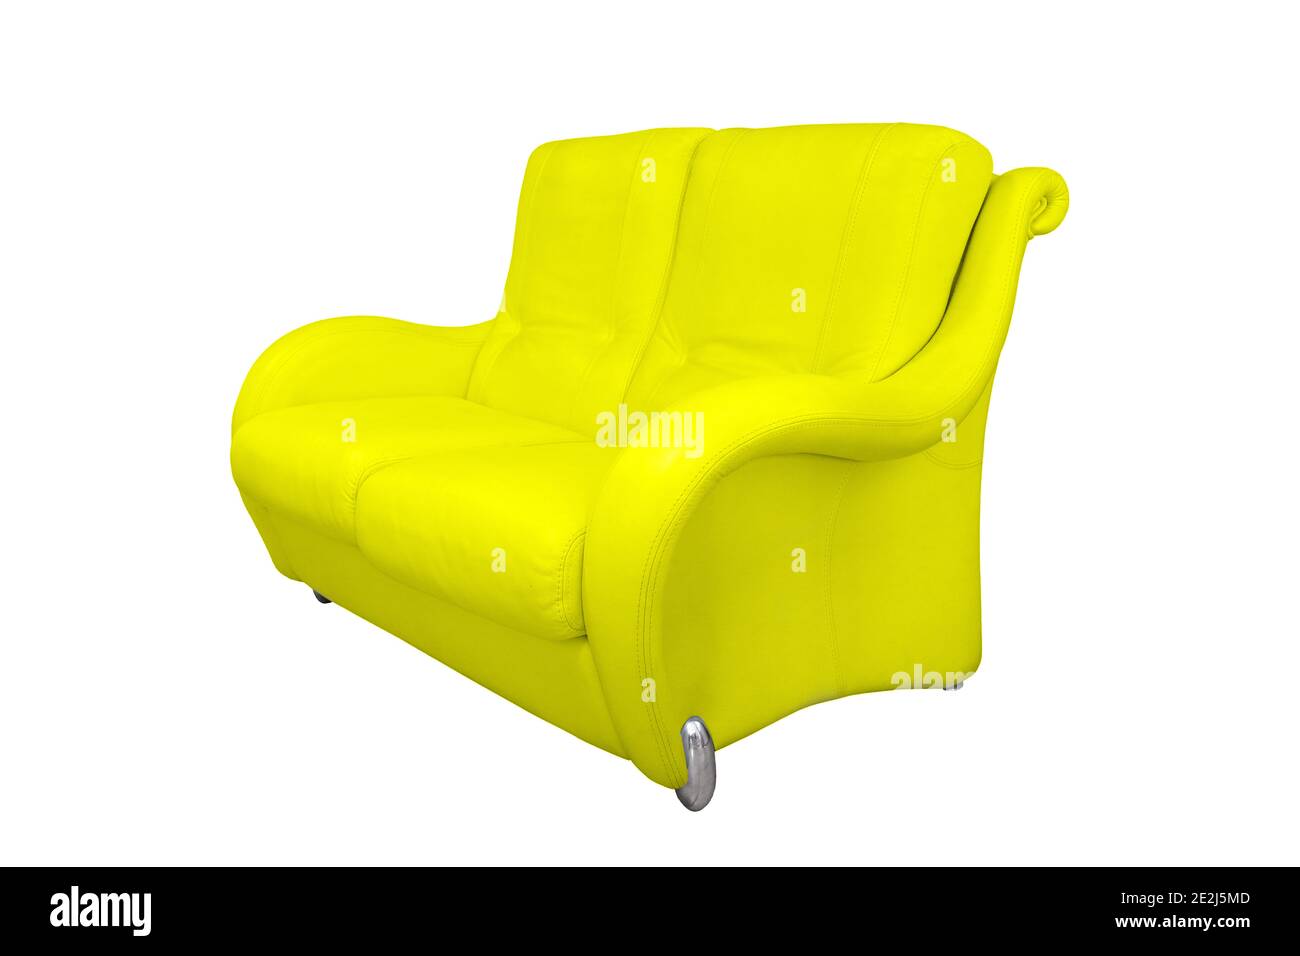 This yellow stylish office sofa made of perforated leather for two persons stands isolated on a white background.  Stock Photo